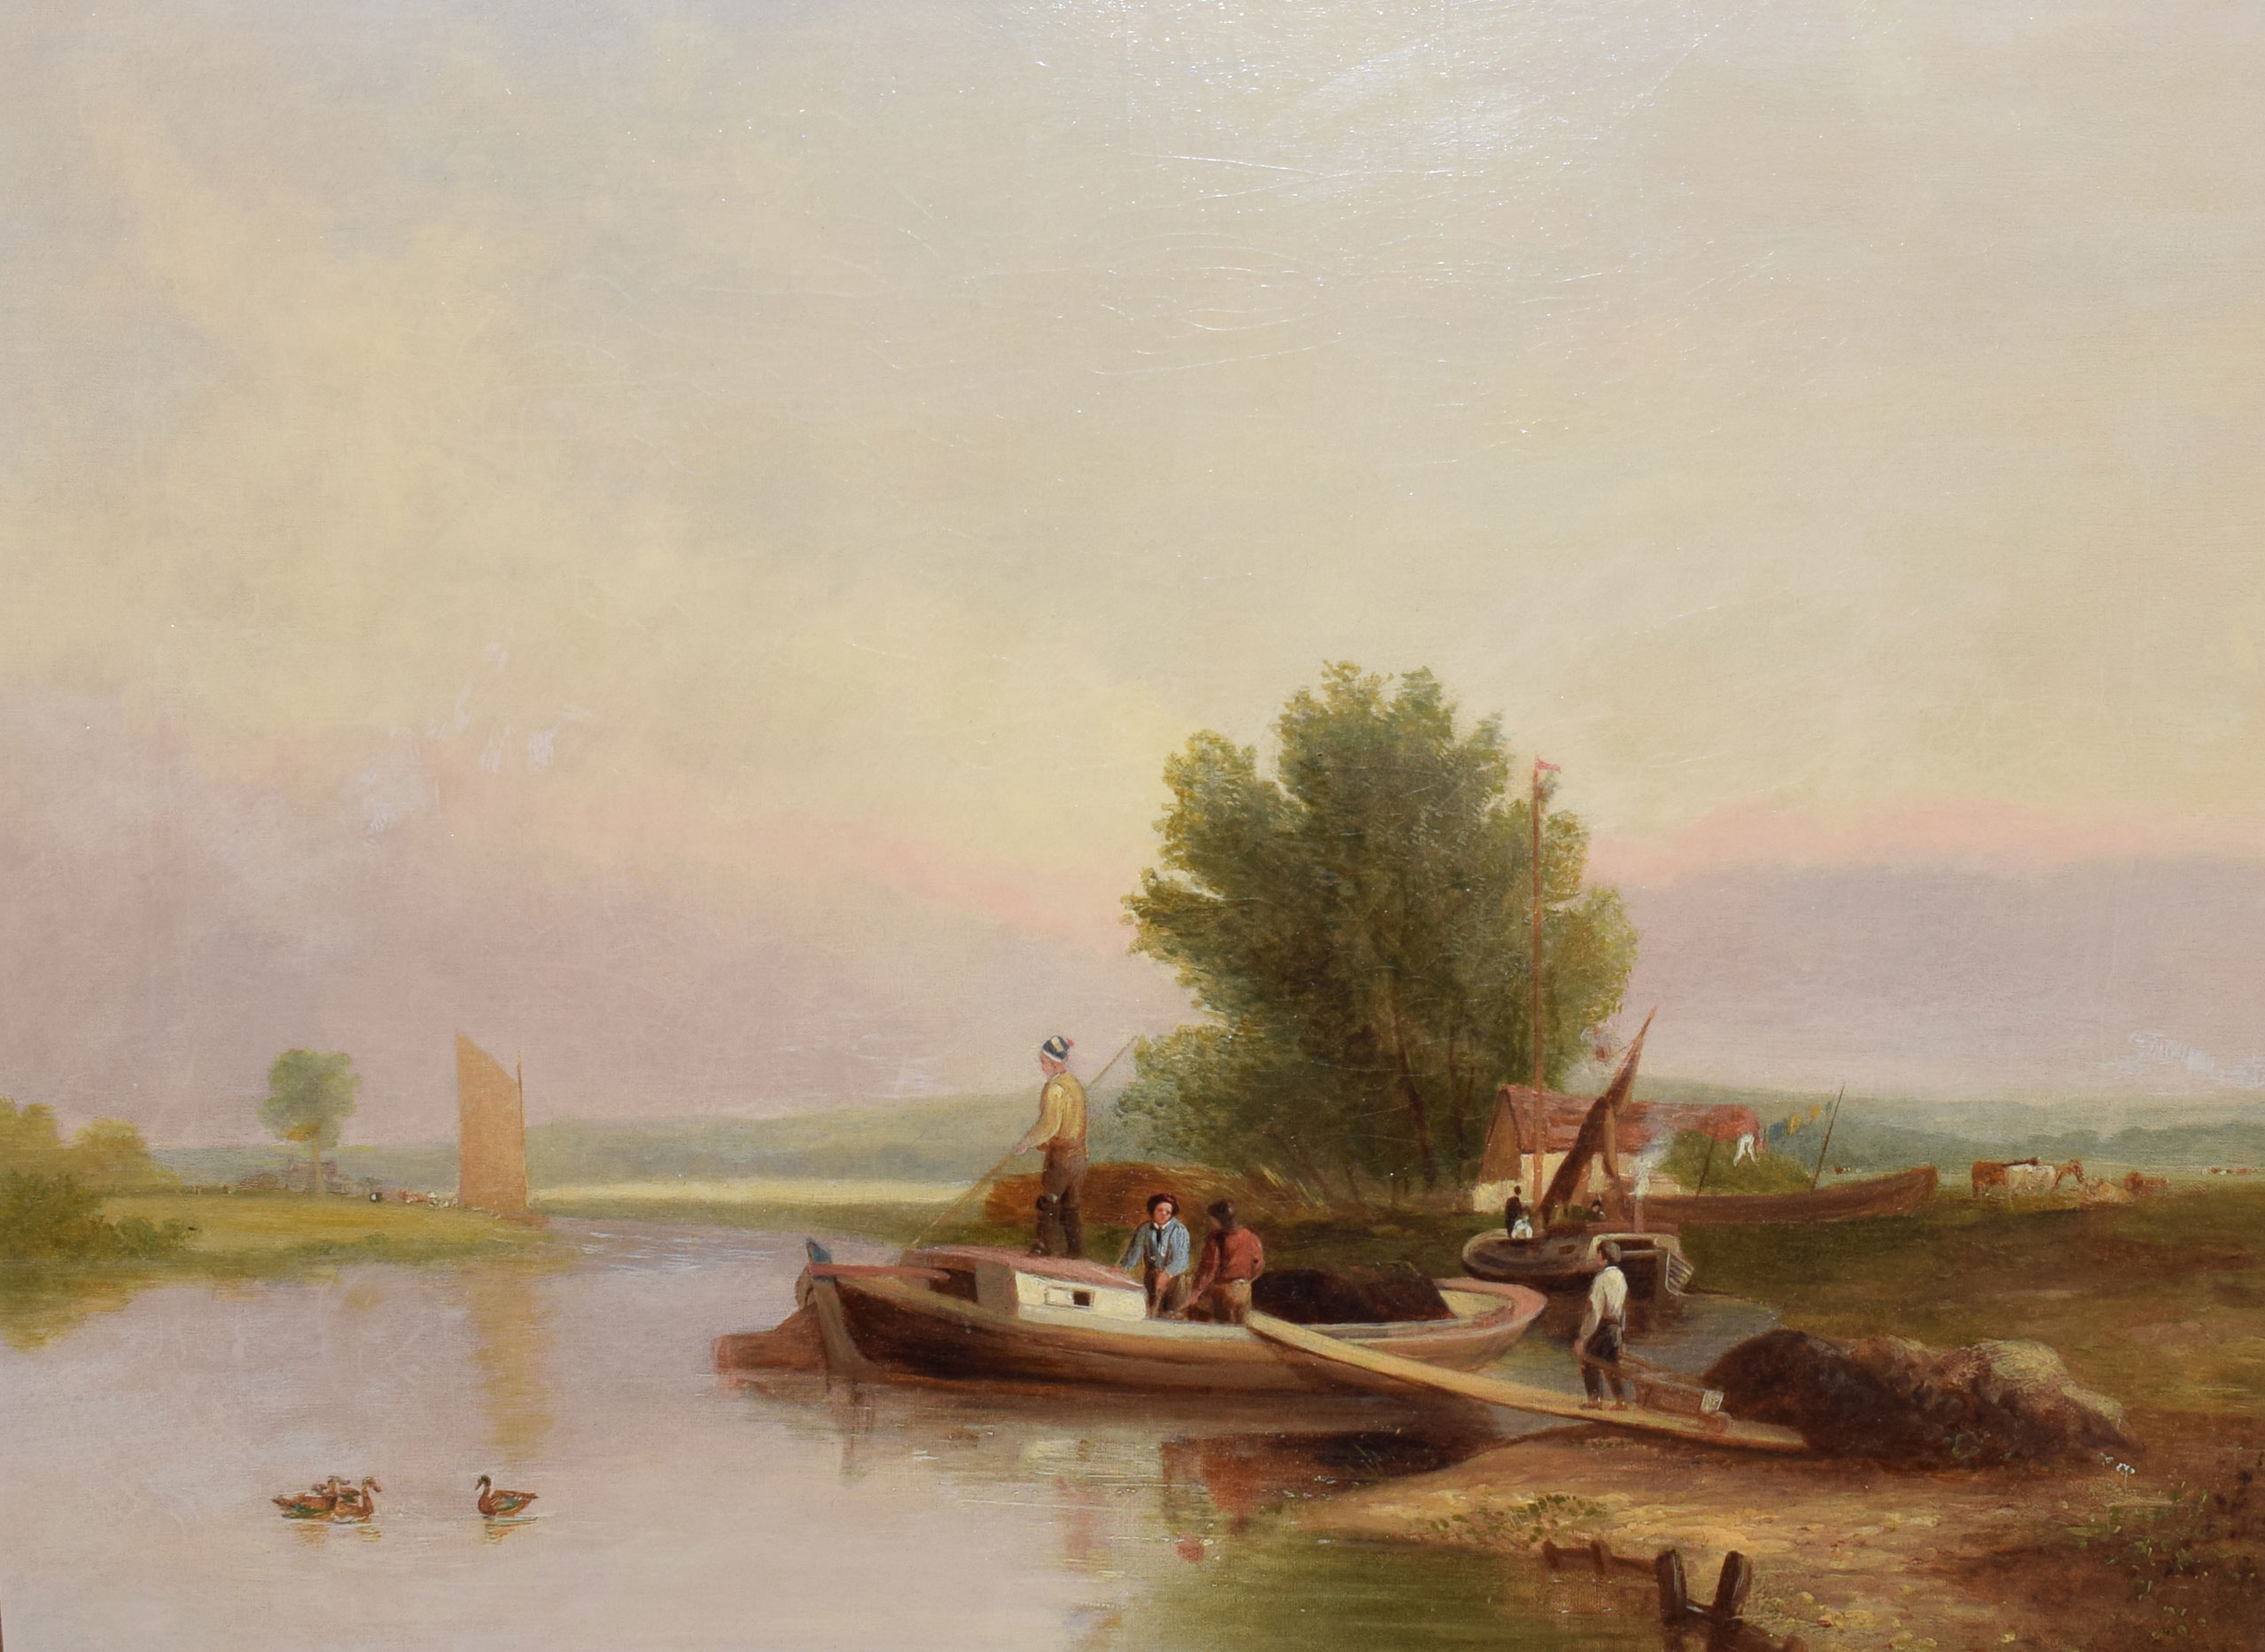 Samuel David Colkett (1806-1863), River Scene with Figures and Boats, oil on canvas, signed lower